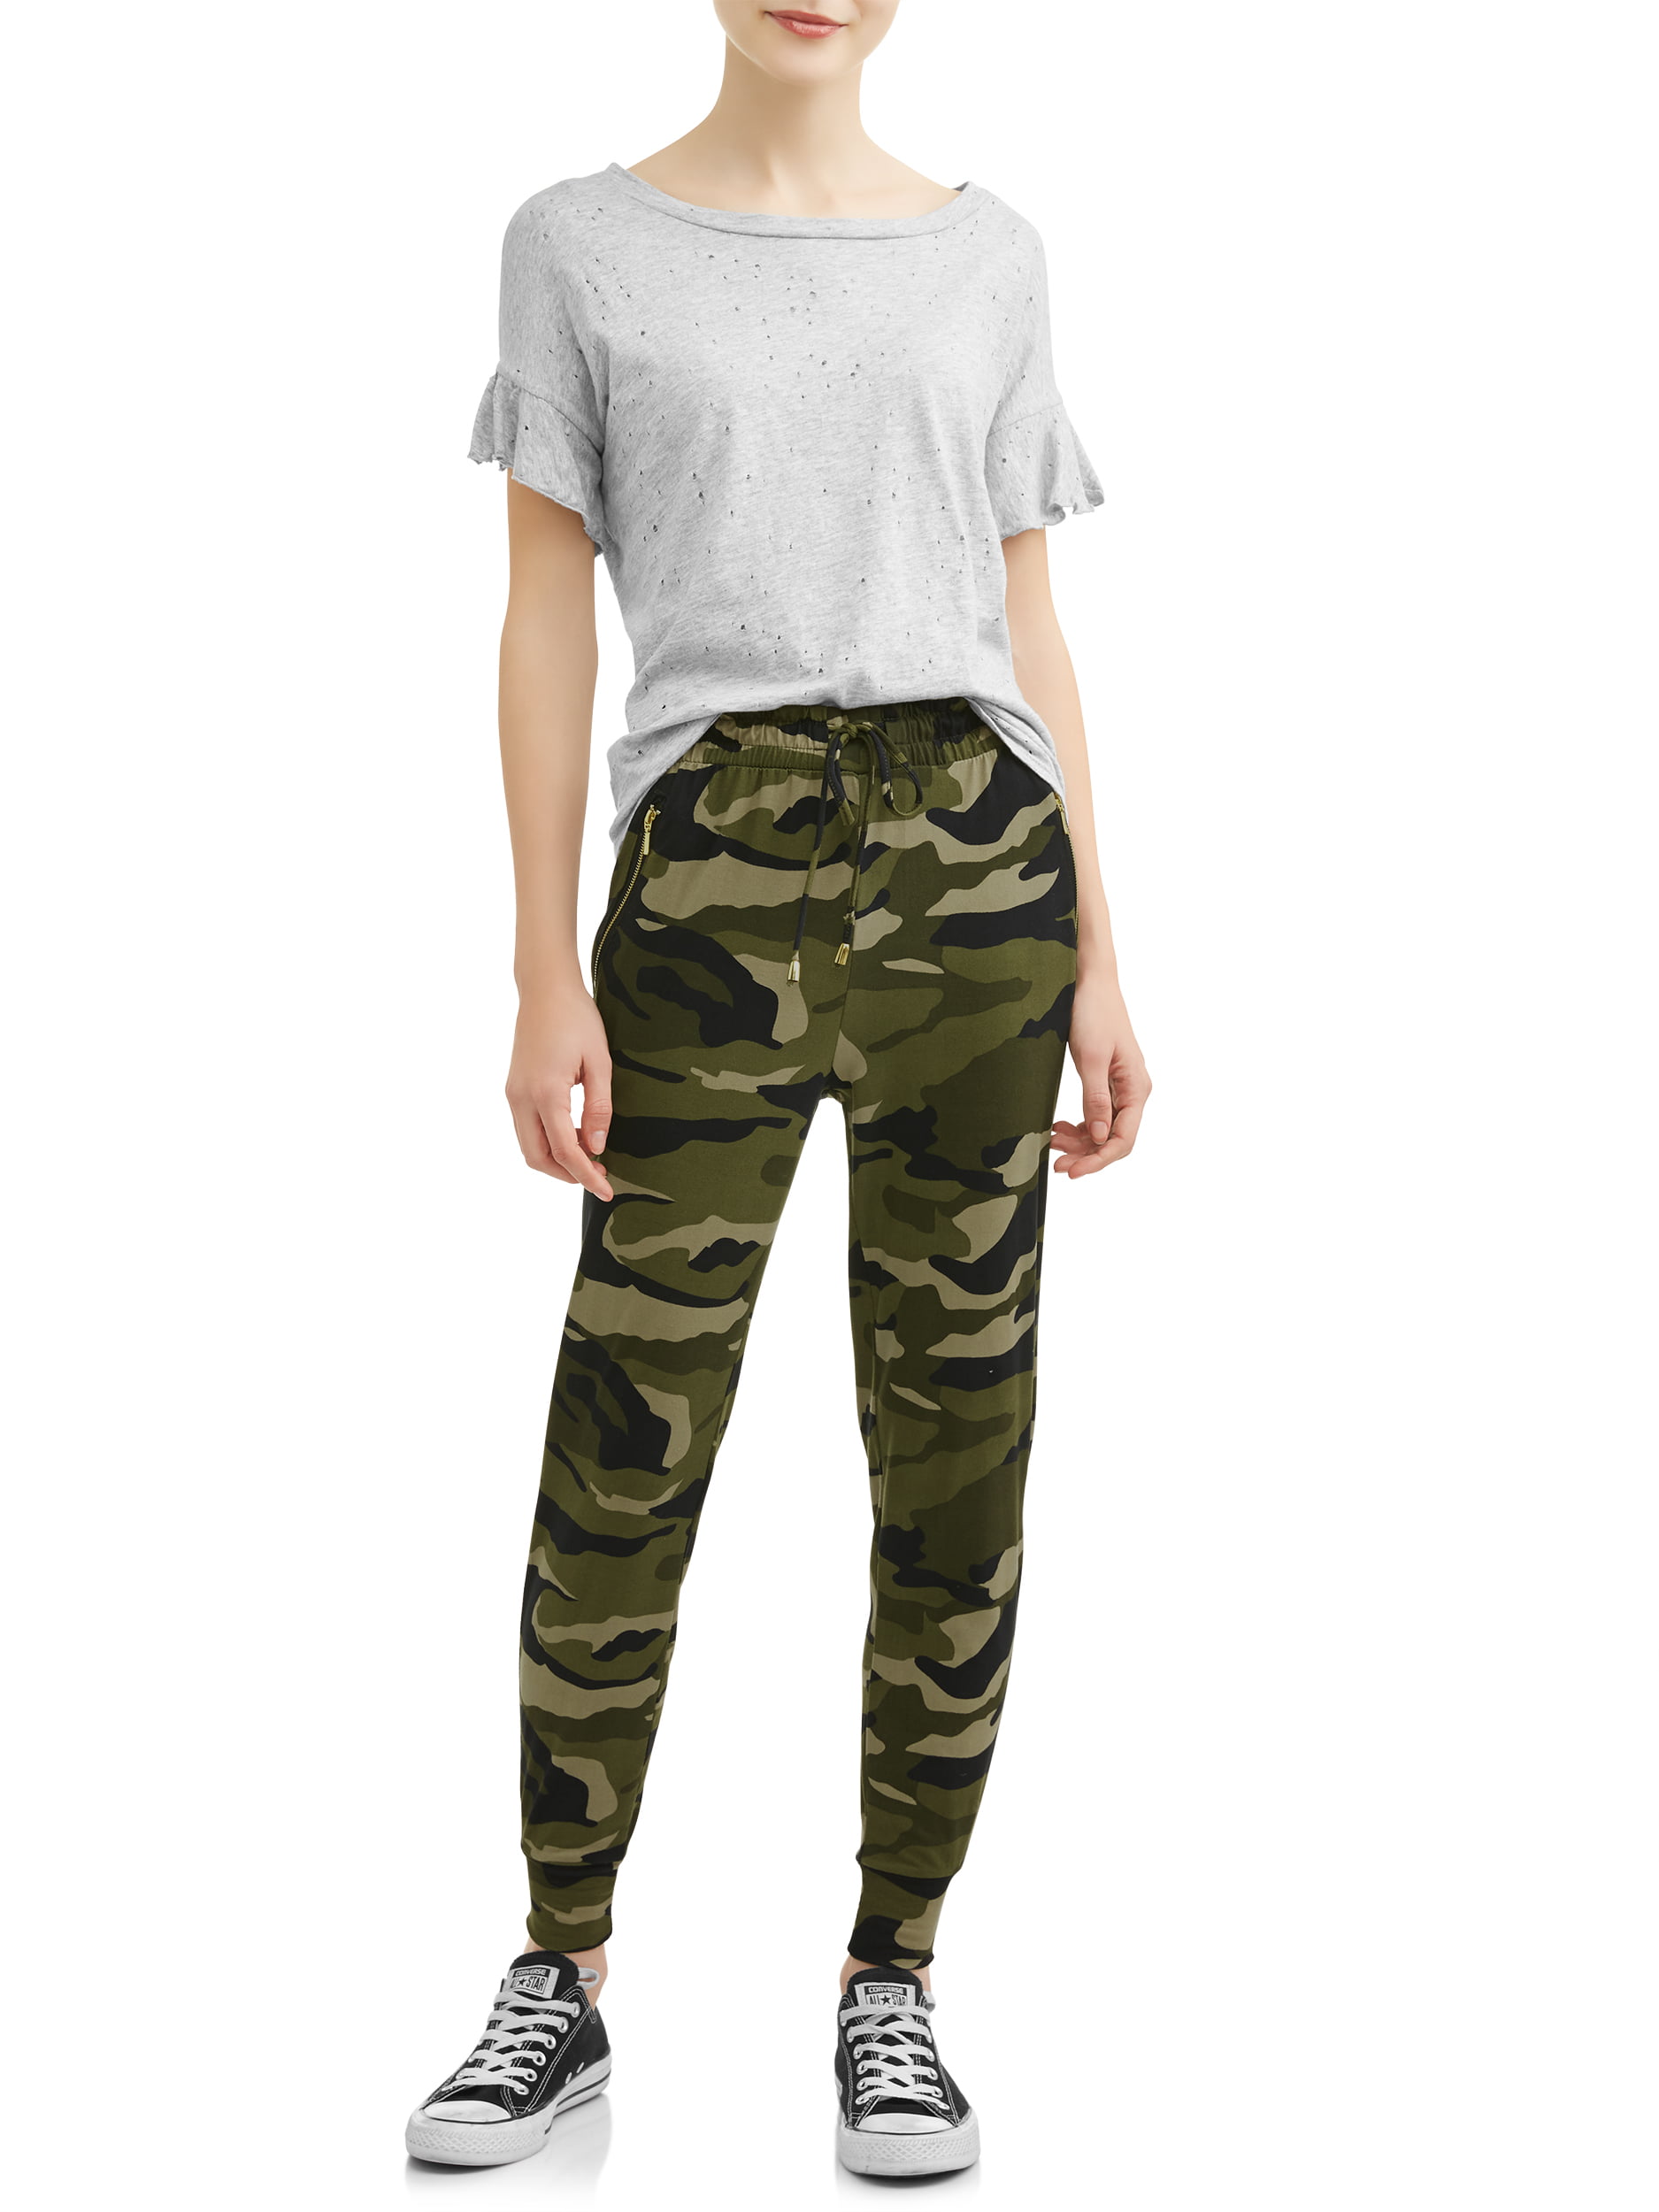 Eye Candy Juniors' Peached Jogger Pants 